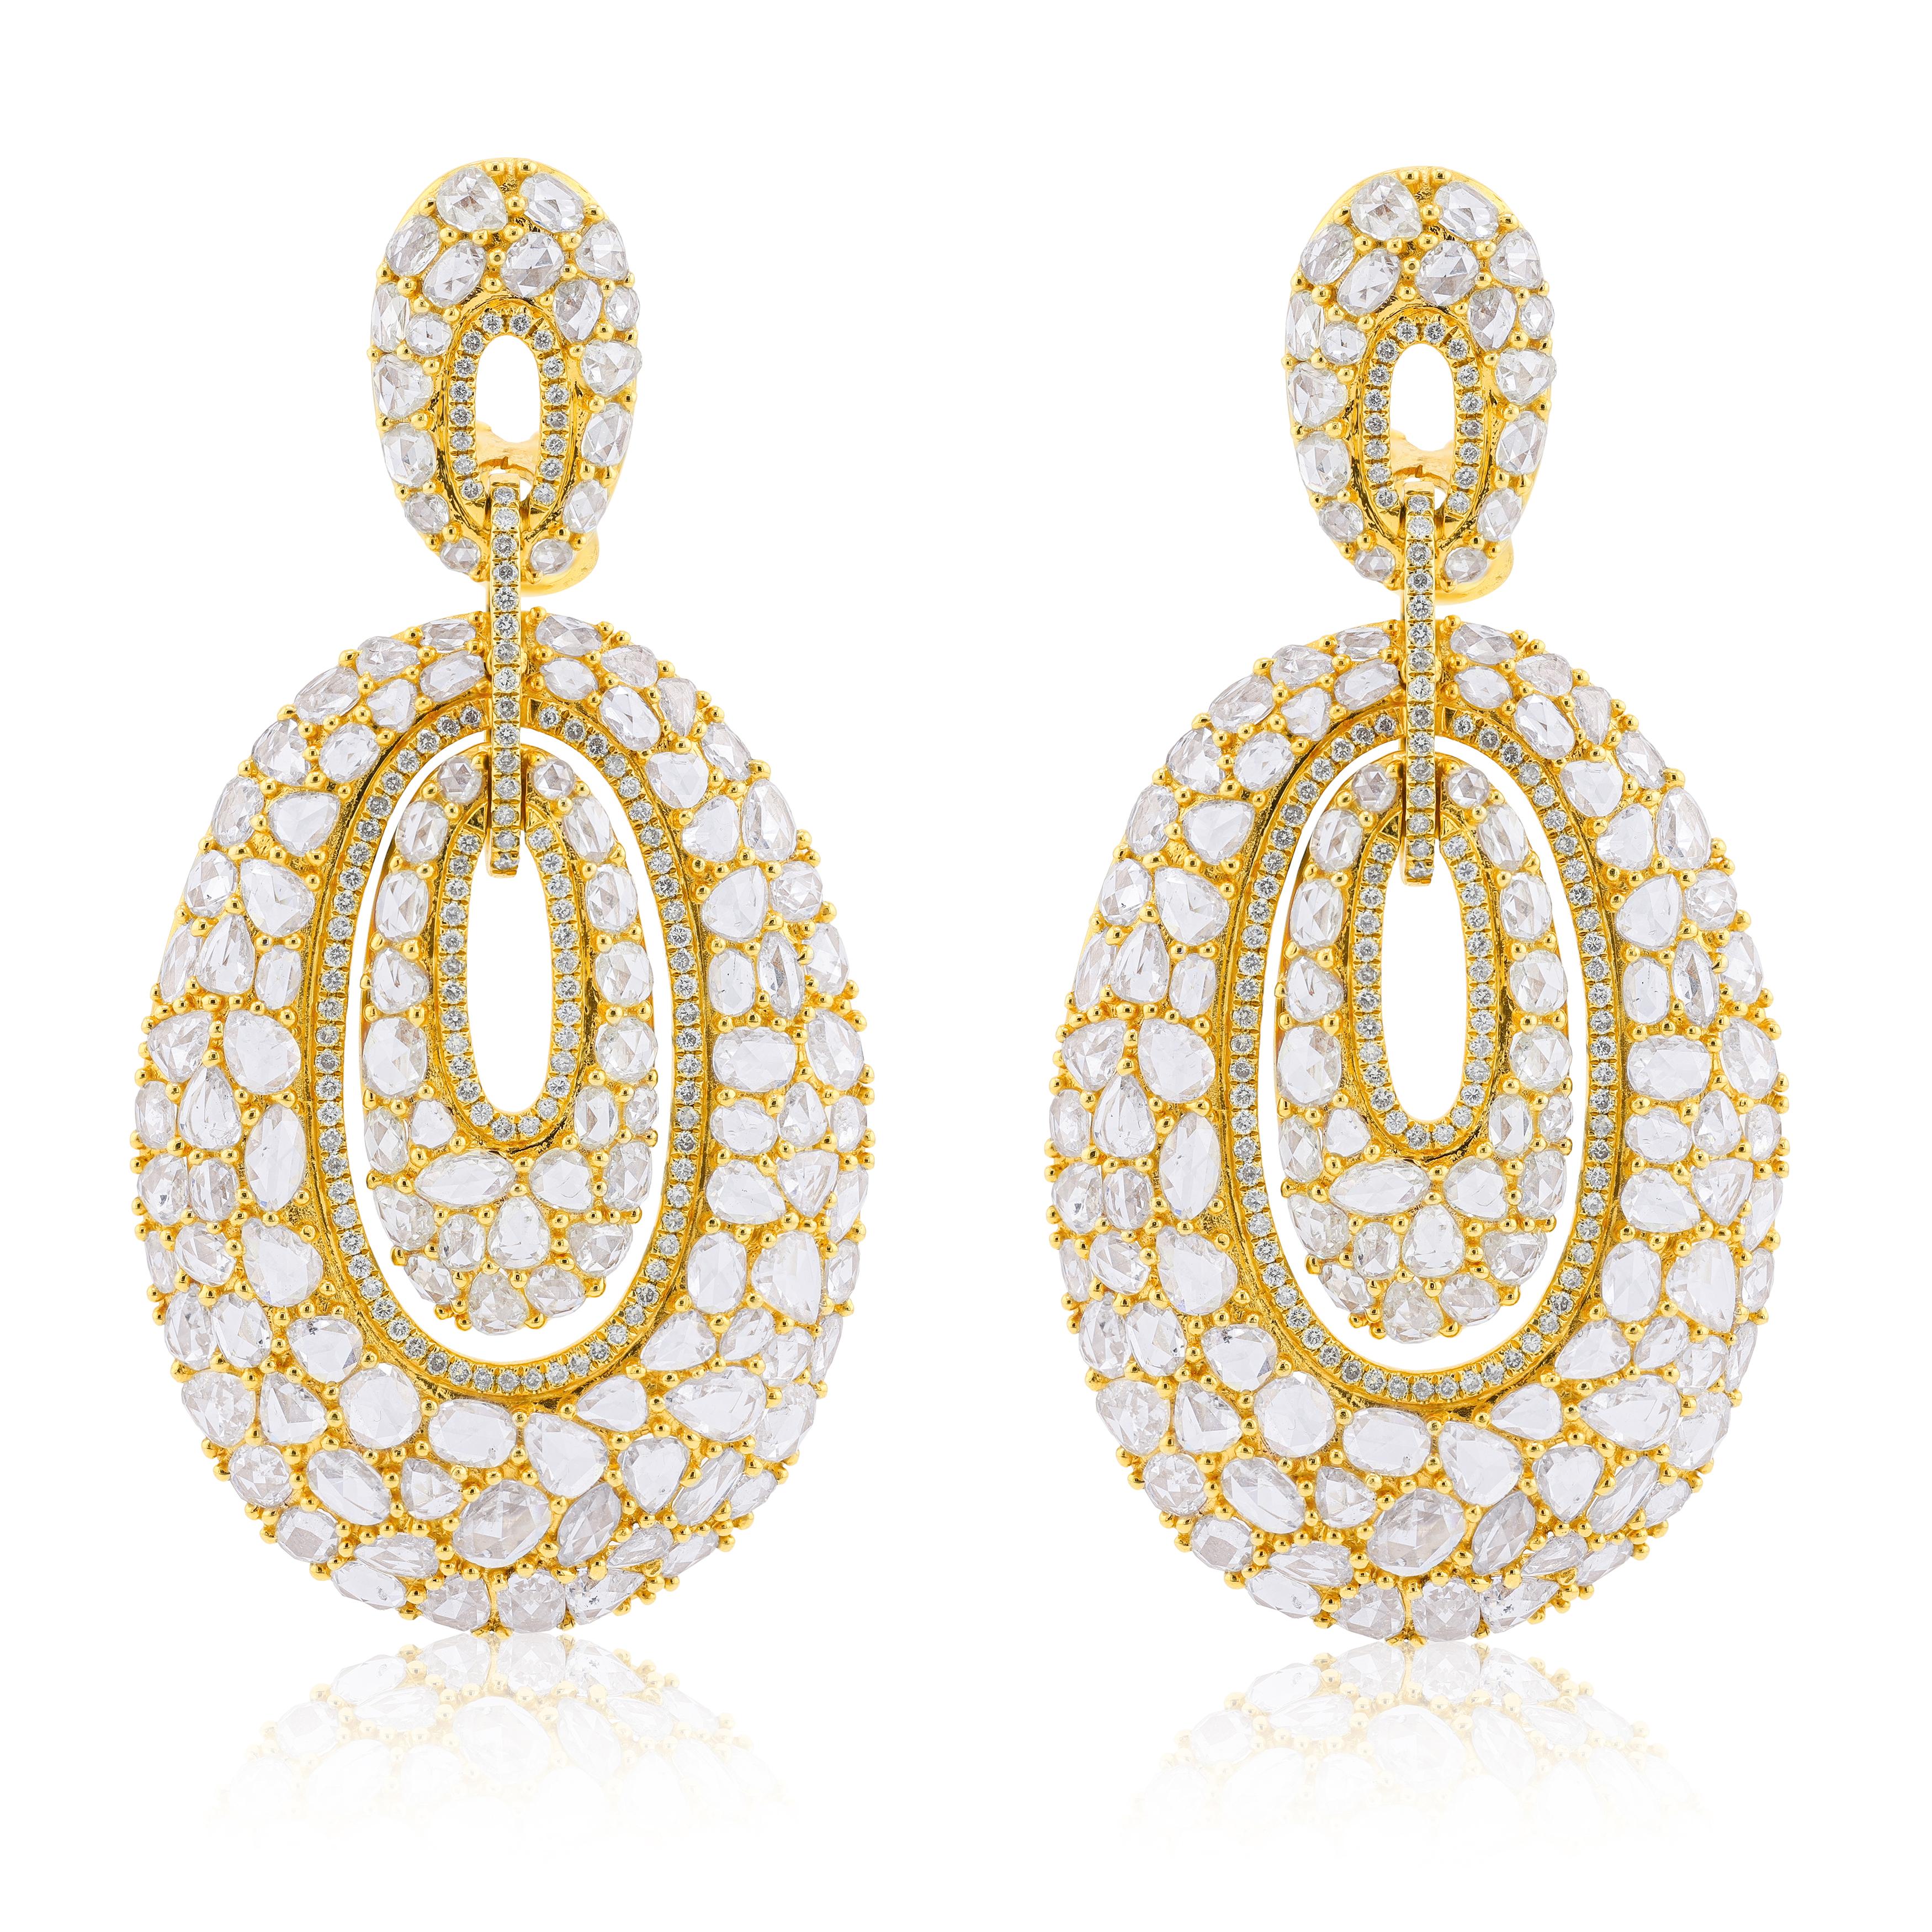 Diana M.  24cts Rose Cut Diamond Chandelier Earrings, 18k G-H Color VS Clairty  For Sale 3